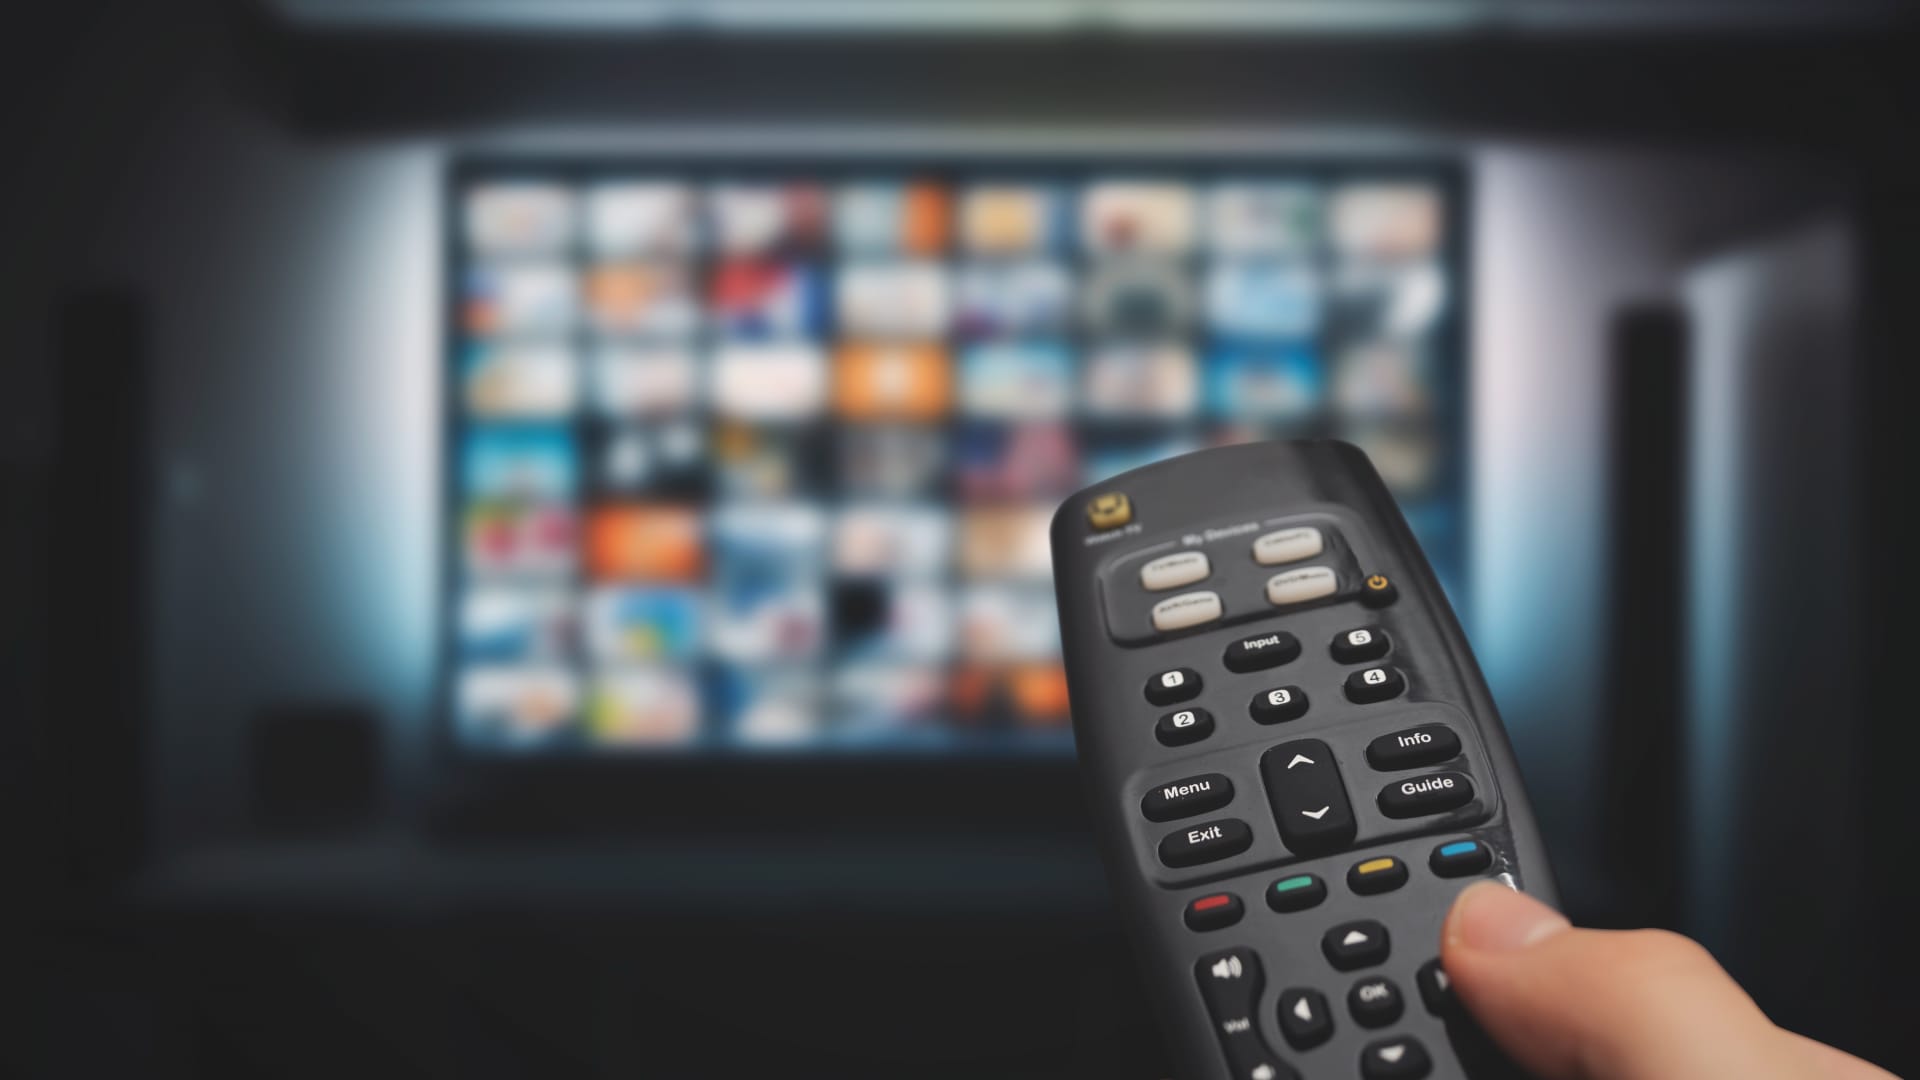 Traditional TV usage drops below 50% for first time ever